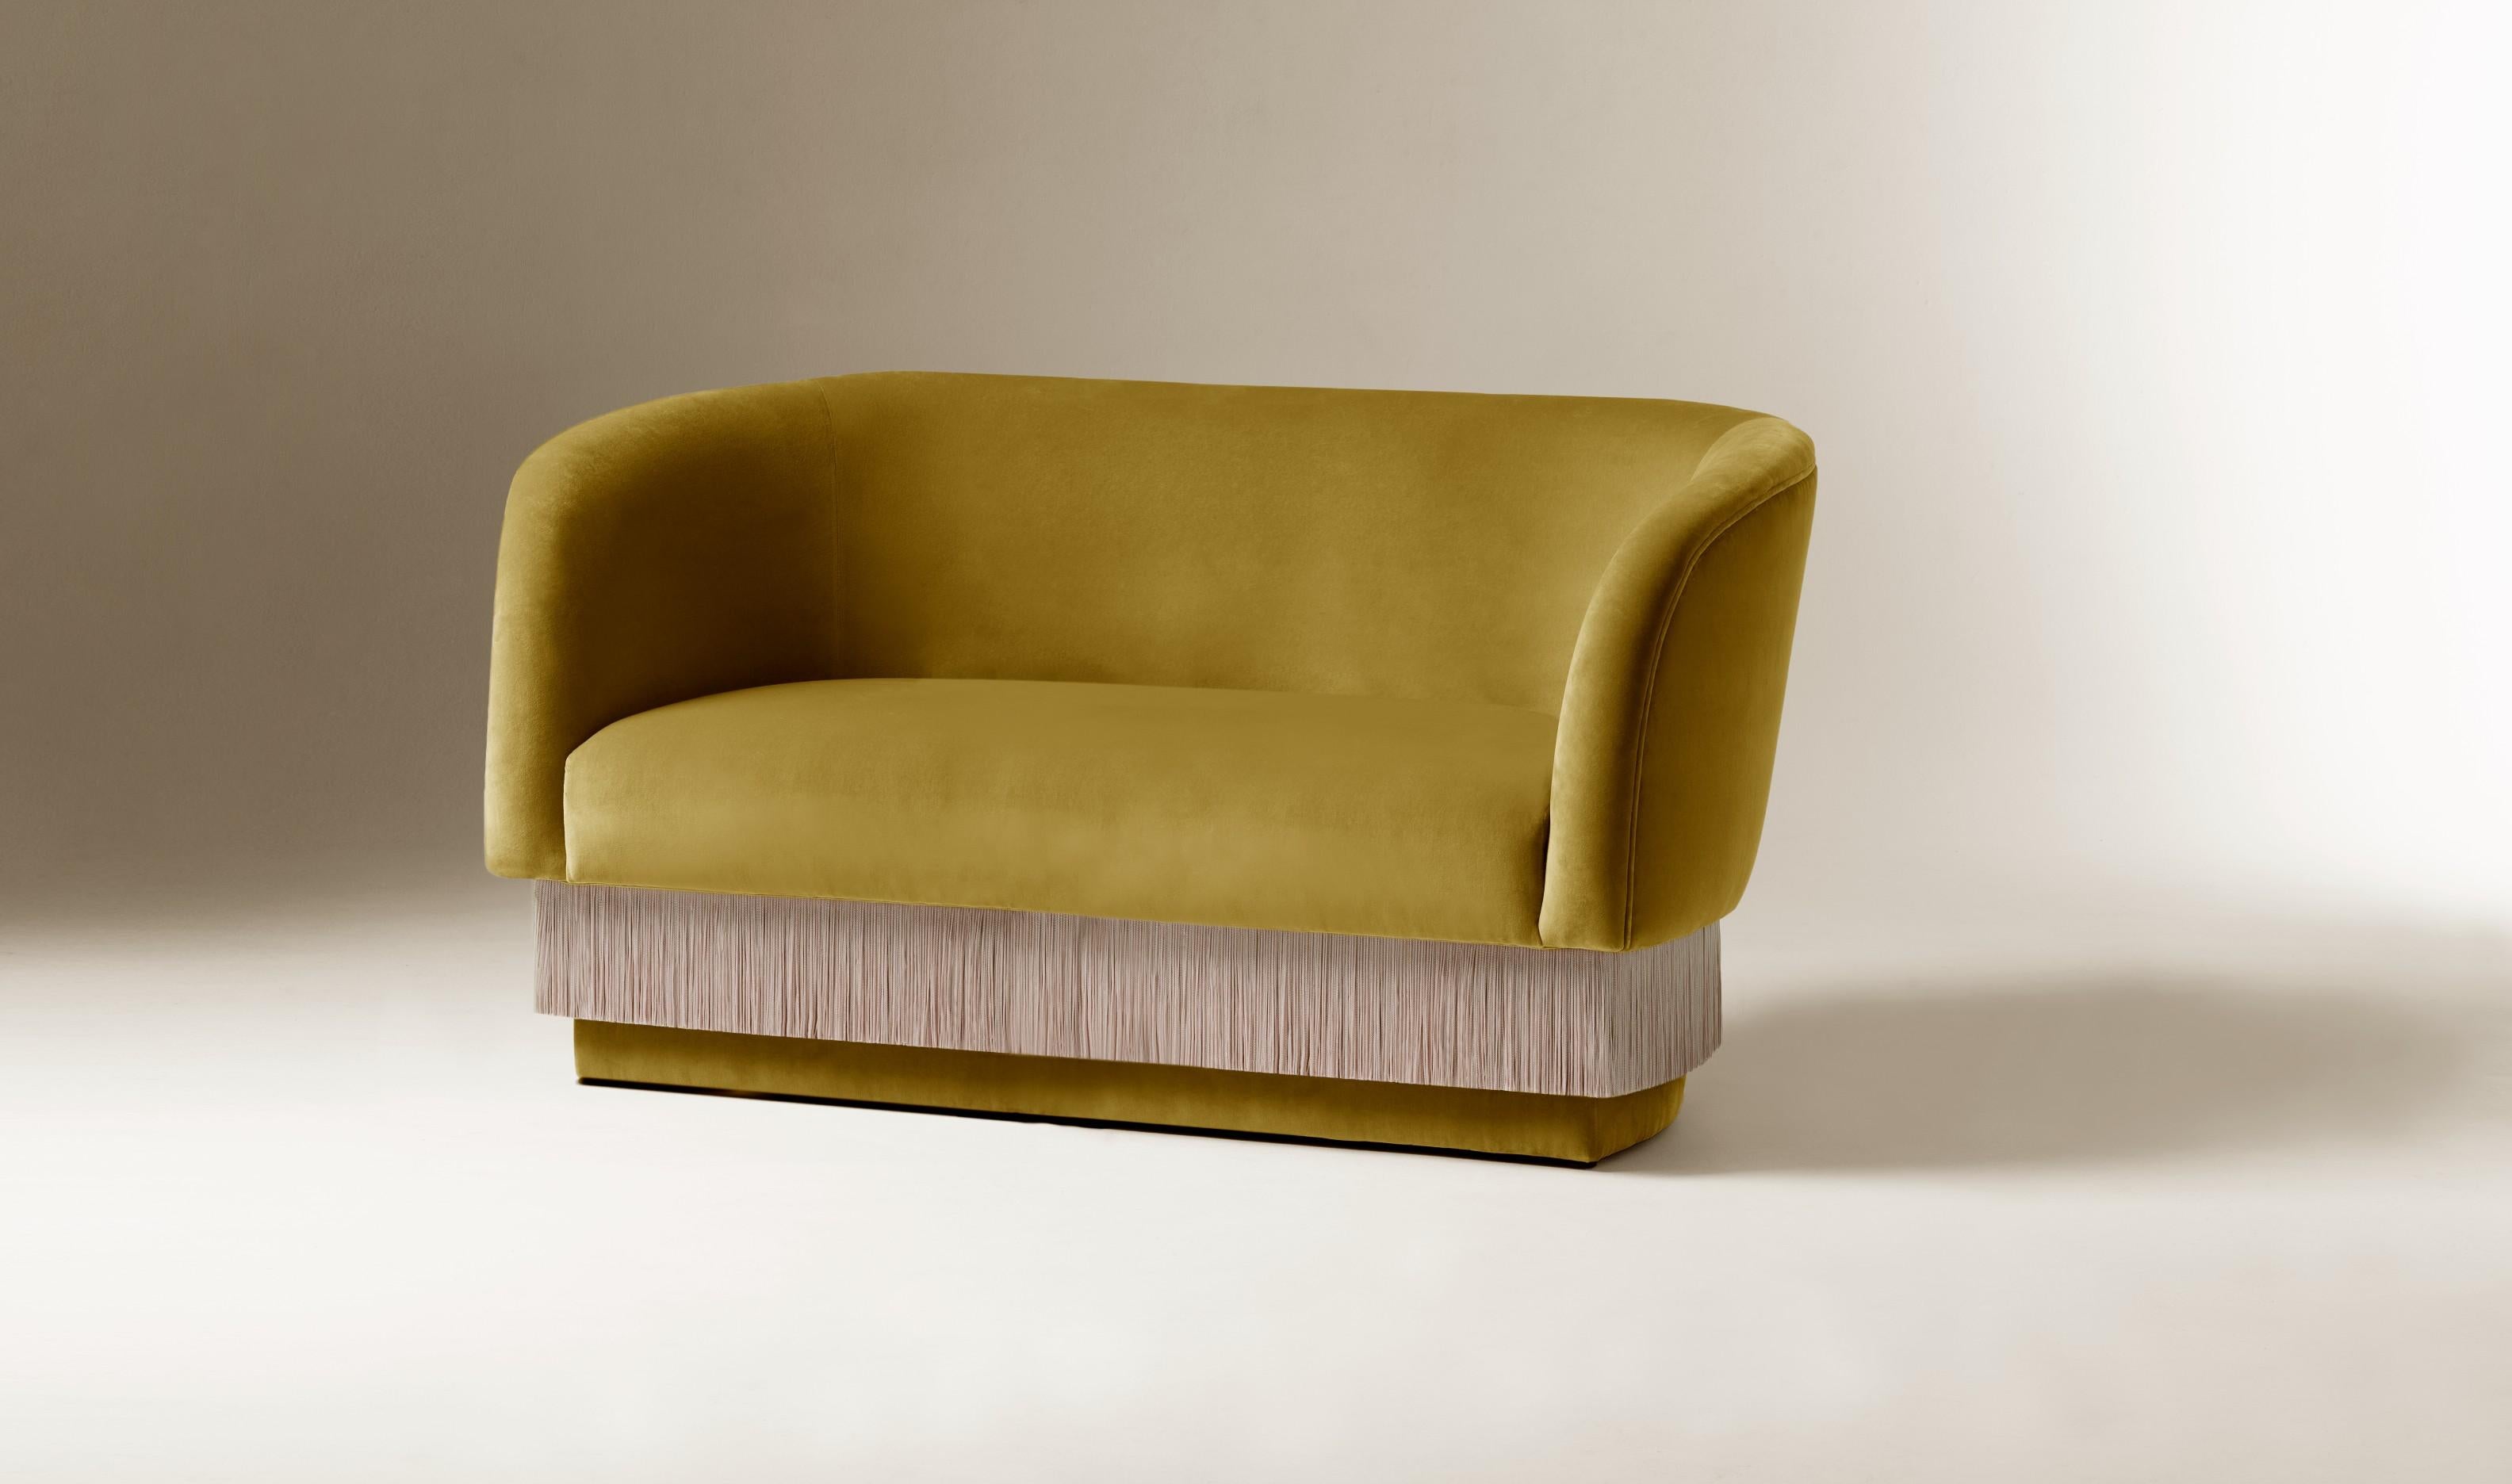 Folie armchair by Dooq
W 180 cm 55” (also available in 140cm, or made to order in other dimensions)
D 85 cm 33”
H 75 cm 30”
Seat height 42 cm 17

Materials: upholstery and piping fabric or leather, fringes.

Dooq is a design company